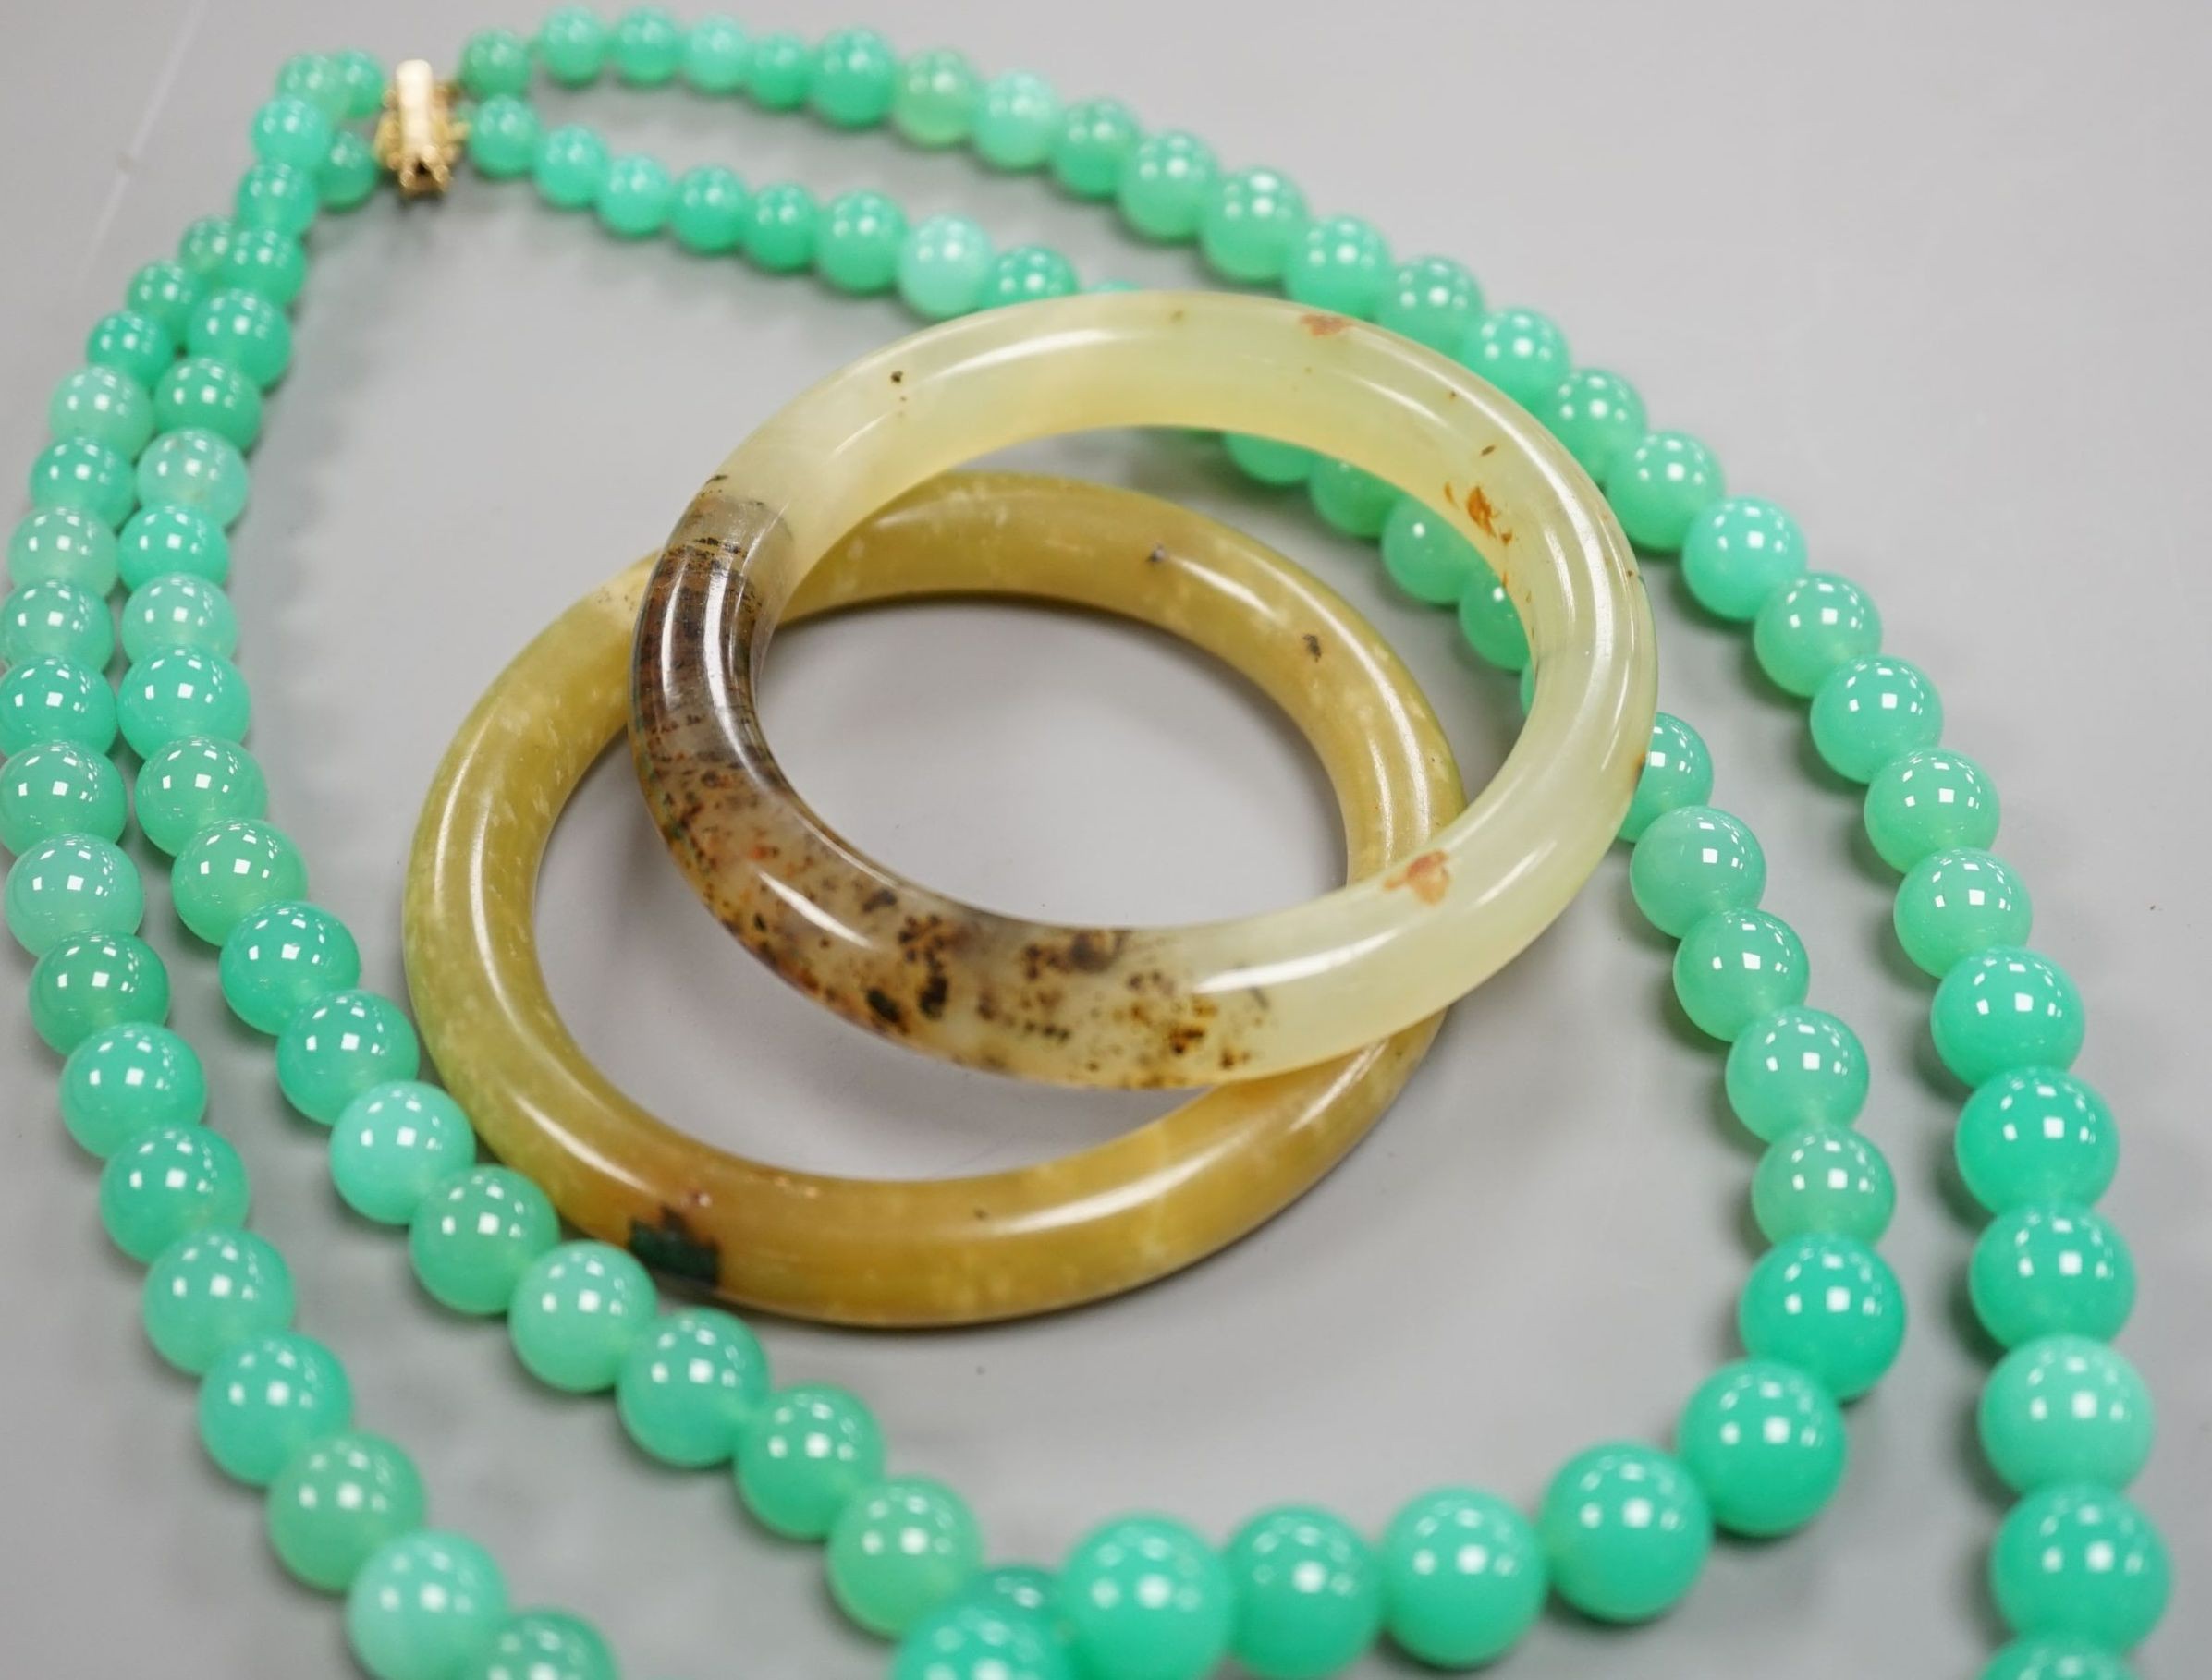 A double strand chrysoprase bead necklace with 750 yellow metal clasp, 50cm and two bowenite bangles.